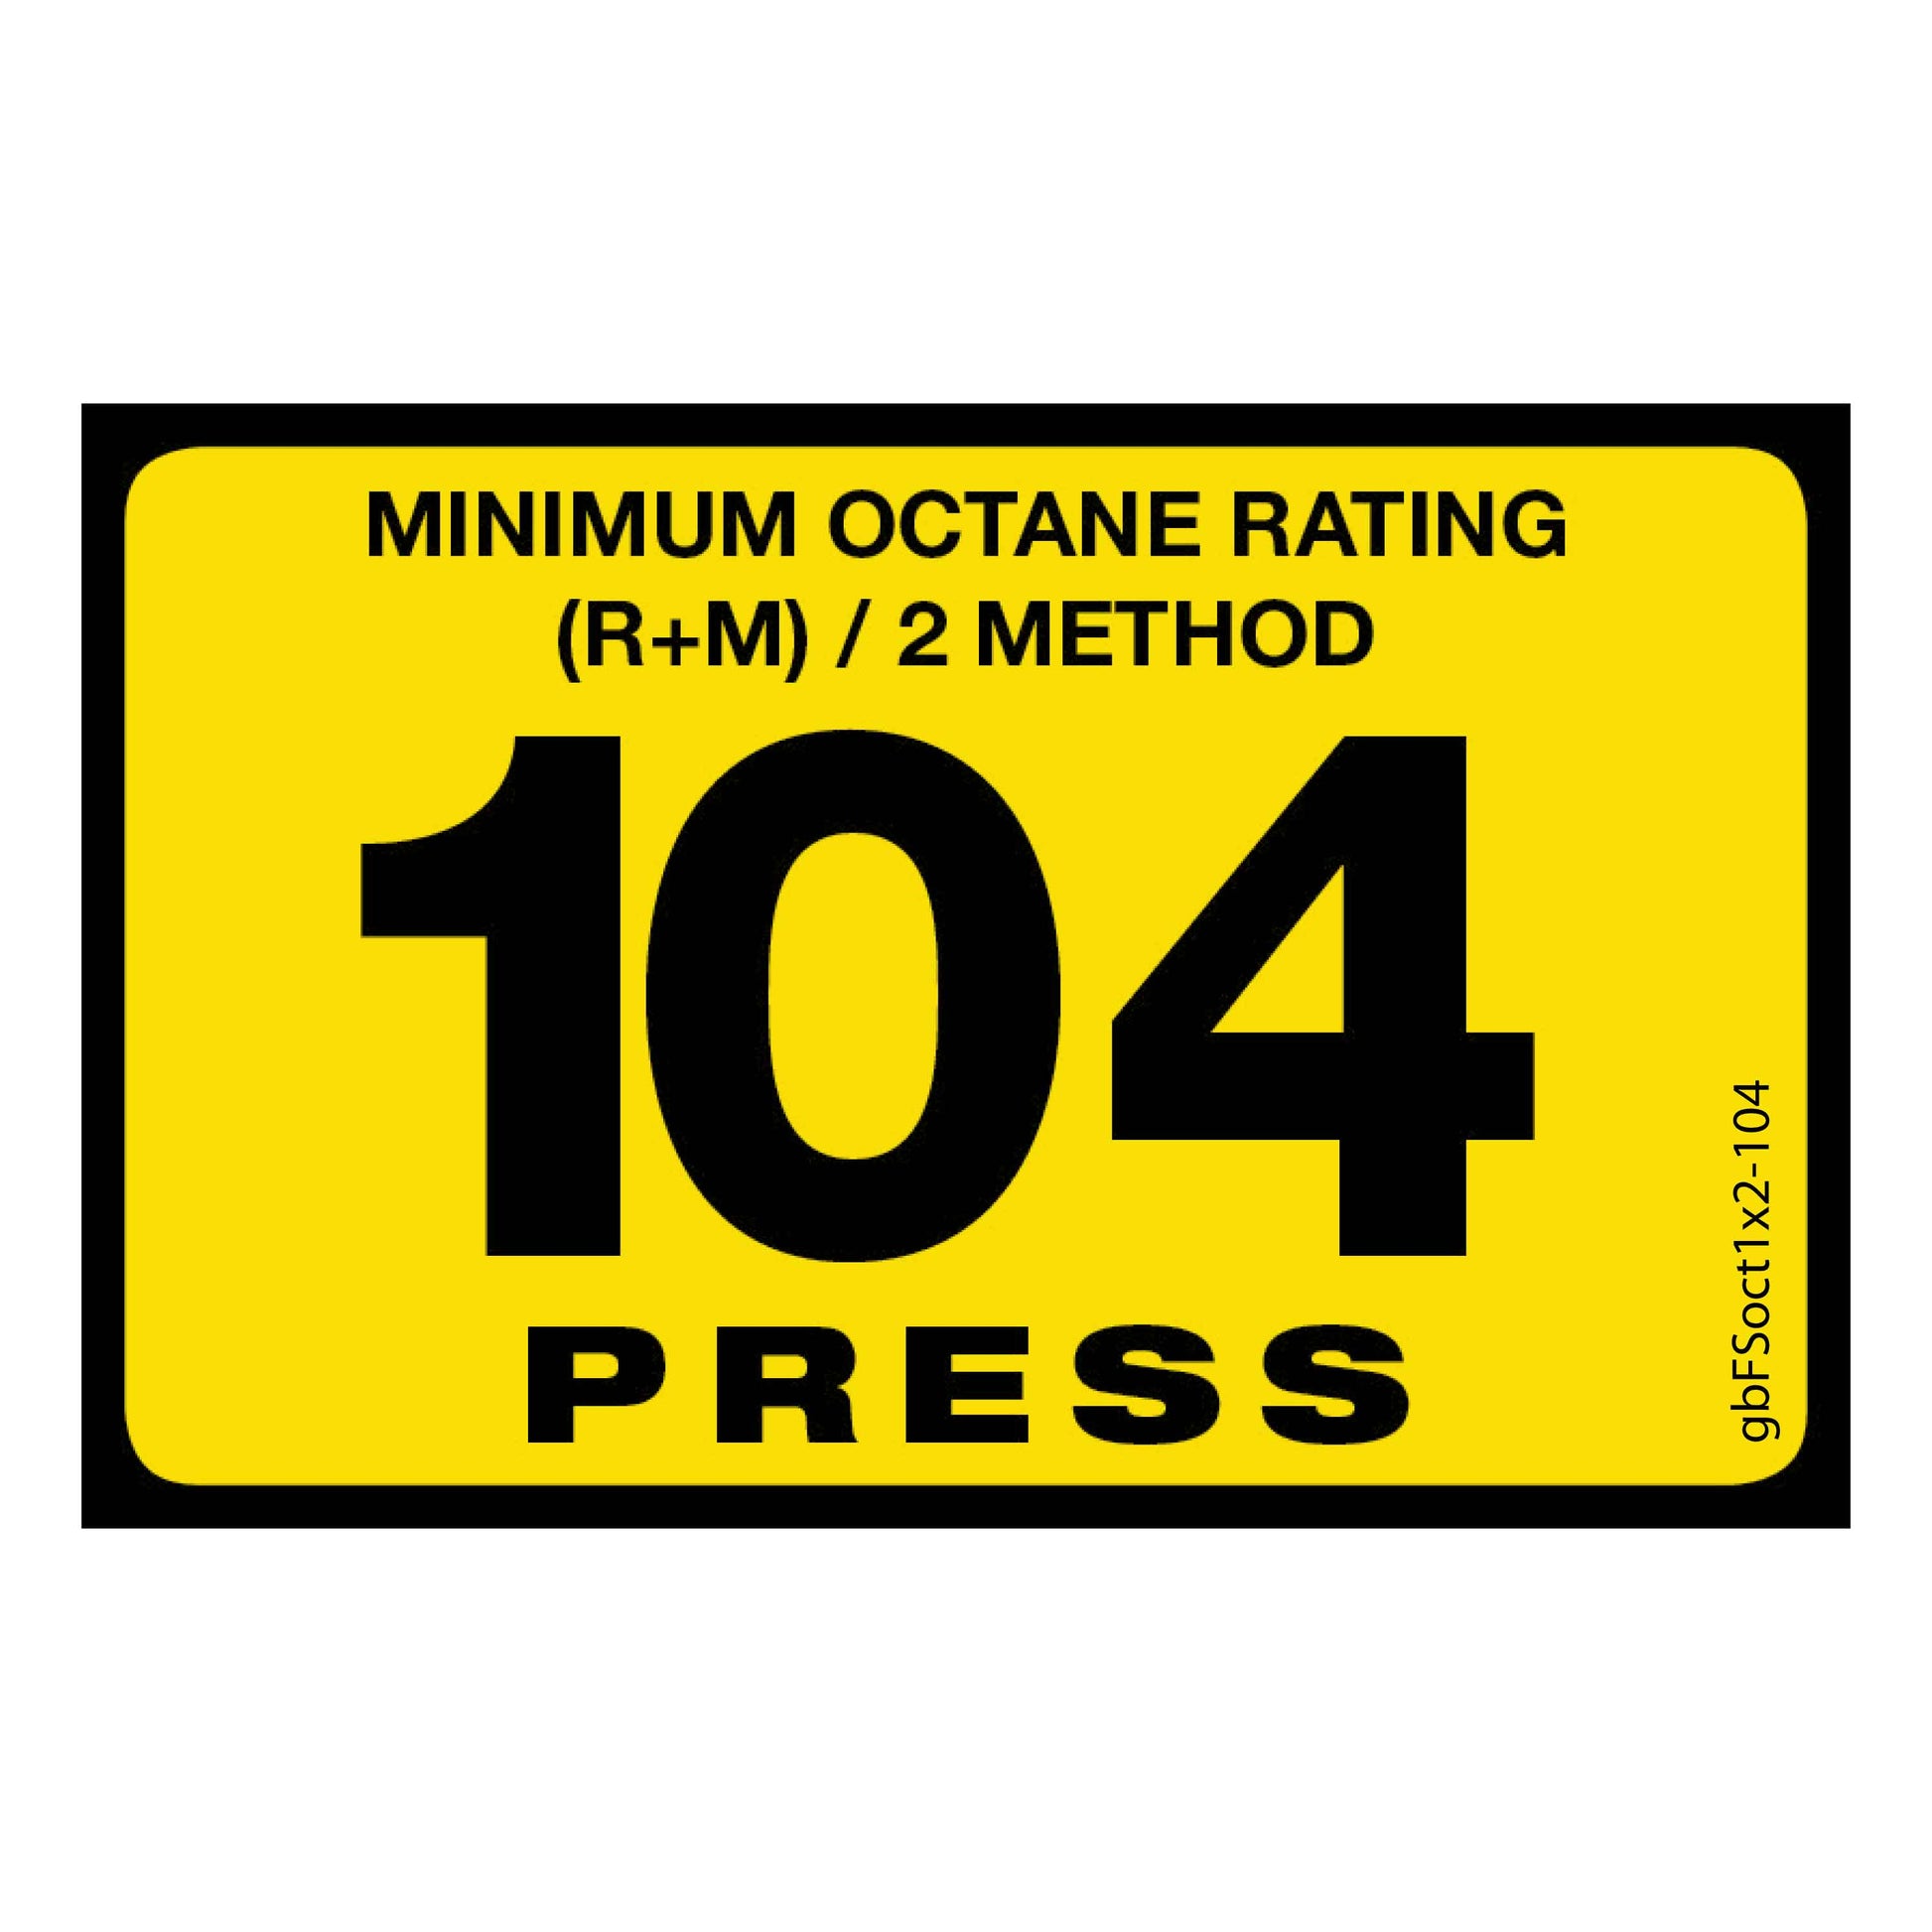 103 Press Octane Rating Decal. 1 inch by 2 inches in size. 